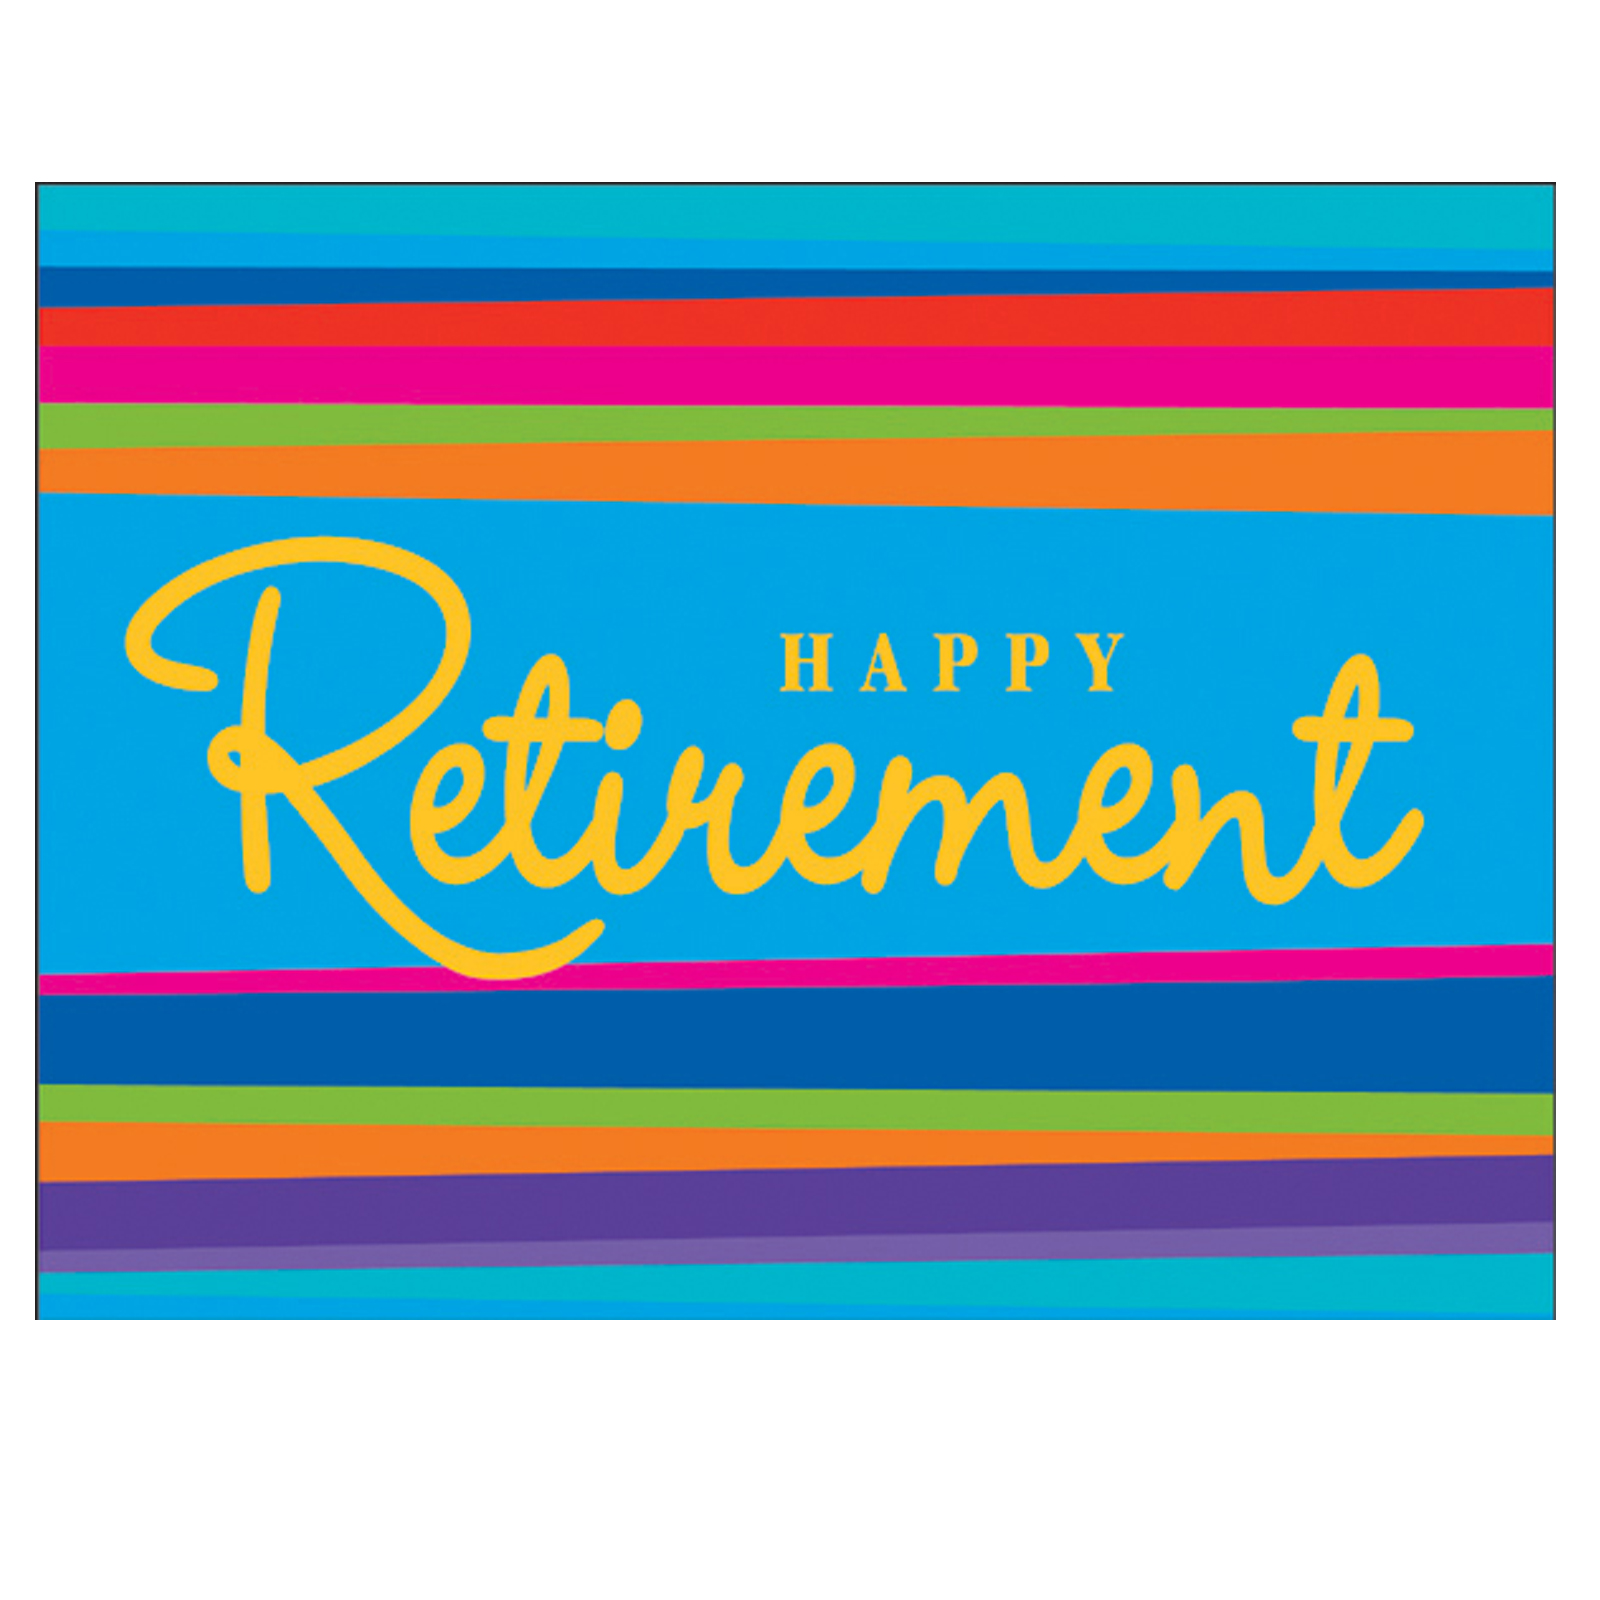 Retirement Images Free Free download on ClipArtMag